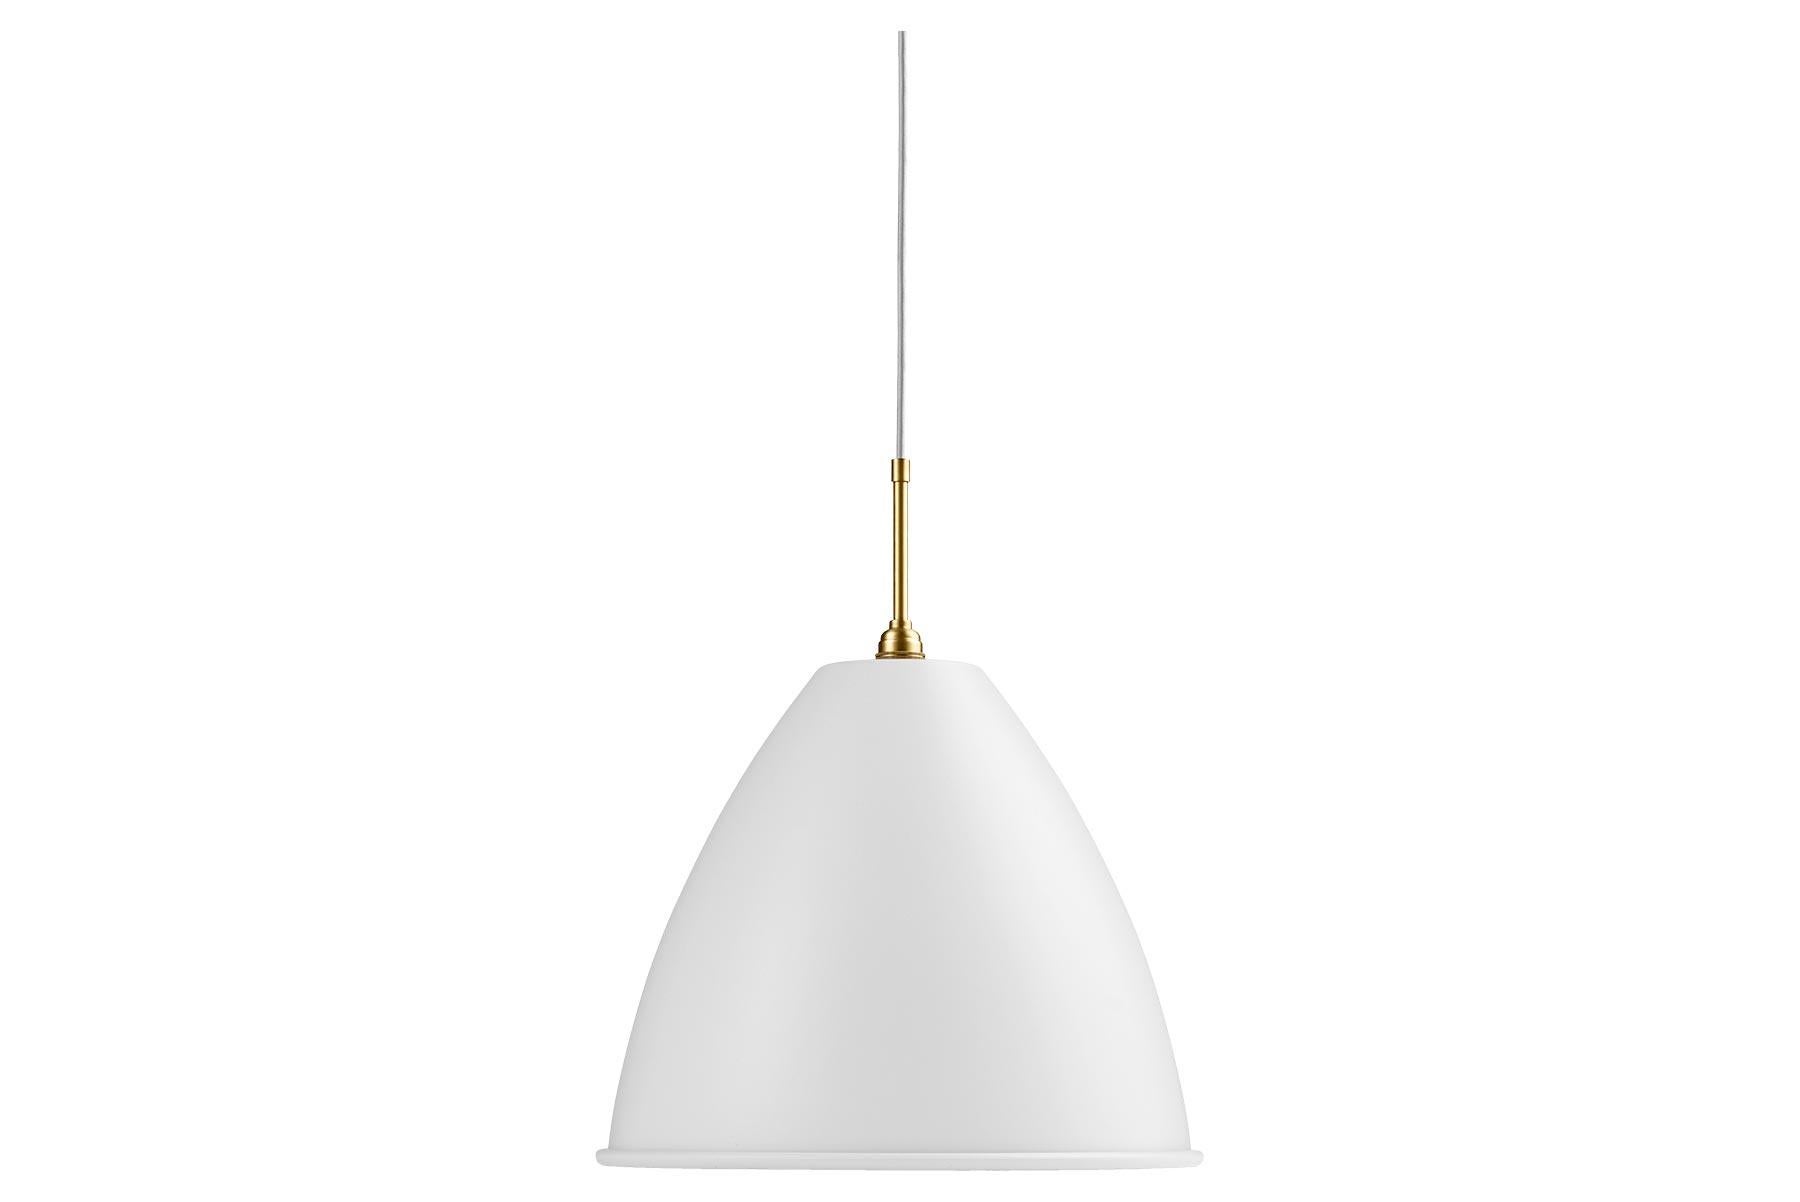 The Bestlite BL9 pendant in four sizes and in a numerous of finishes was designed in 1930 by the Bauhaus influenced British designer Robert Dudley Best. With its great heritage and contemporary look, the BL9 pendant is a coveted design worldwide.